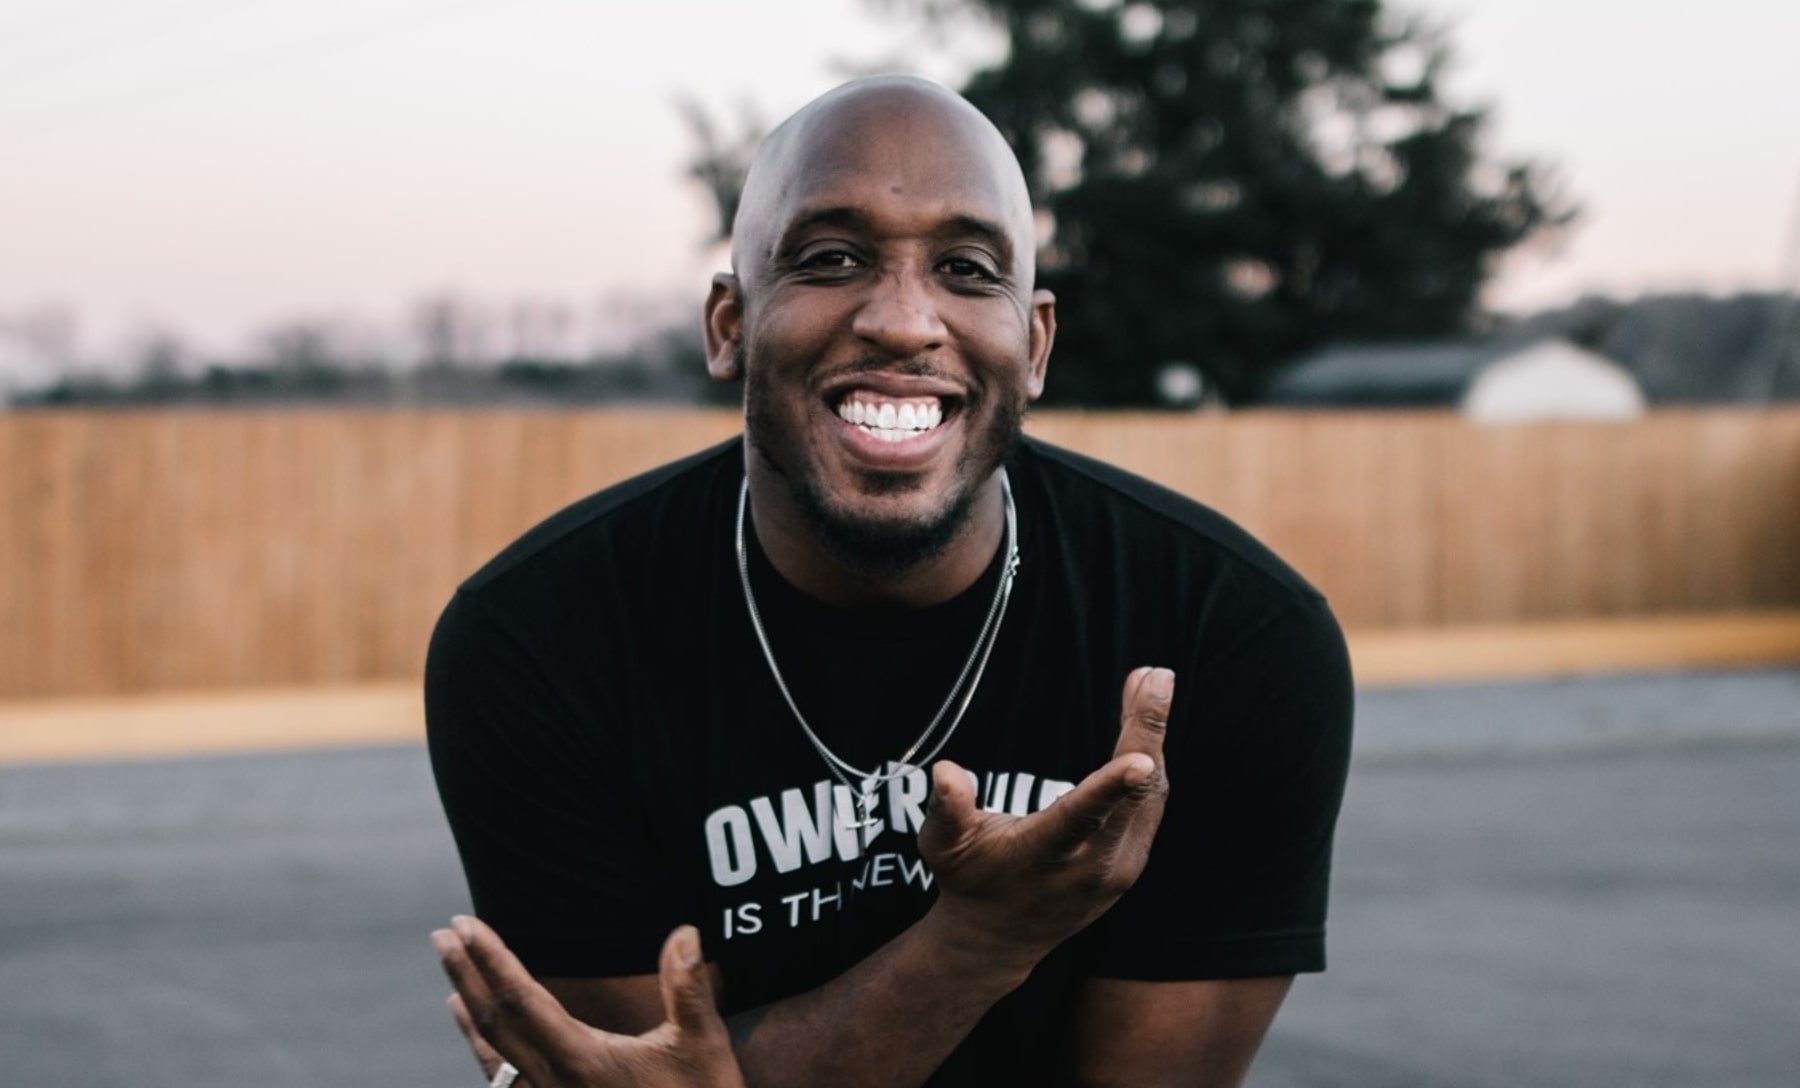 Derek Minor Drops New Song “Pull Up” With Greg James & Thicc James